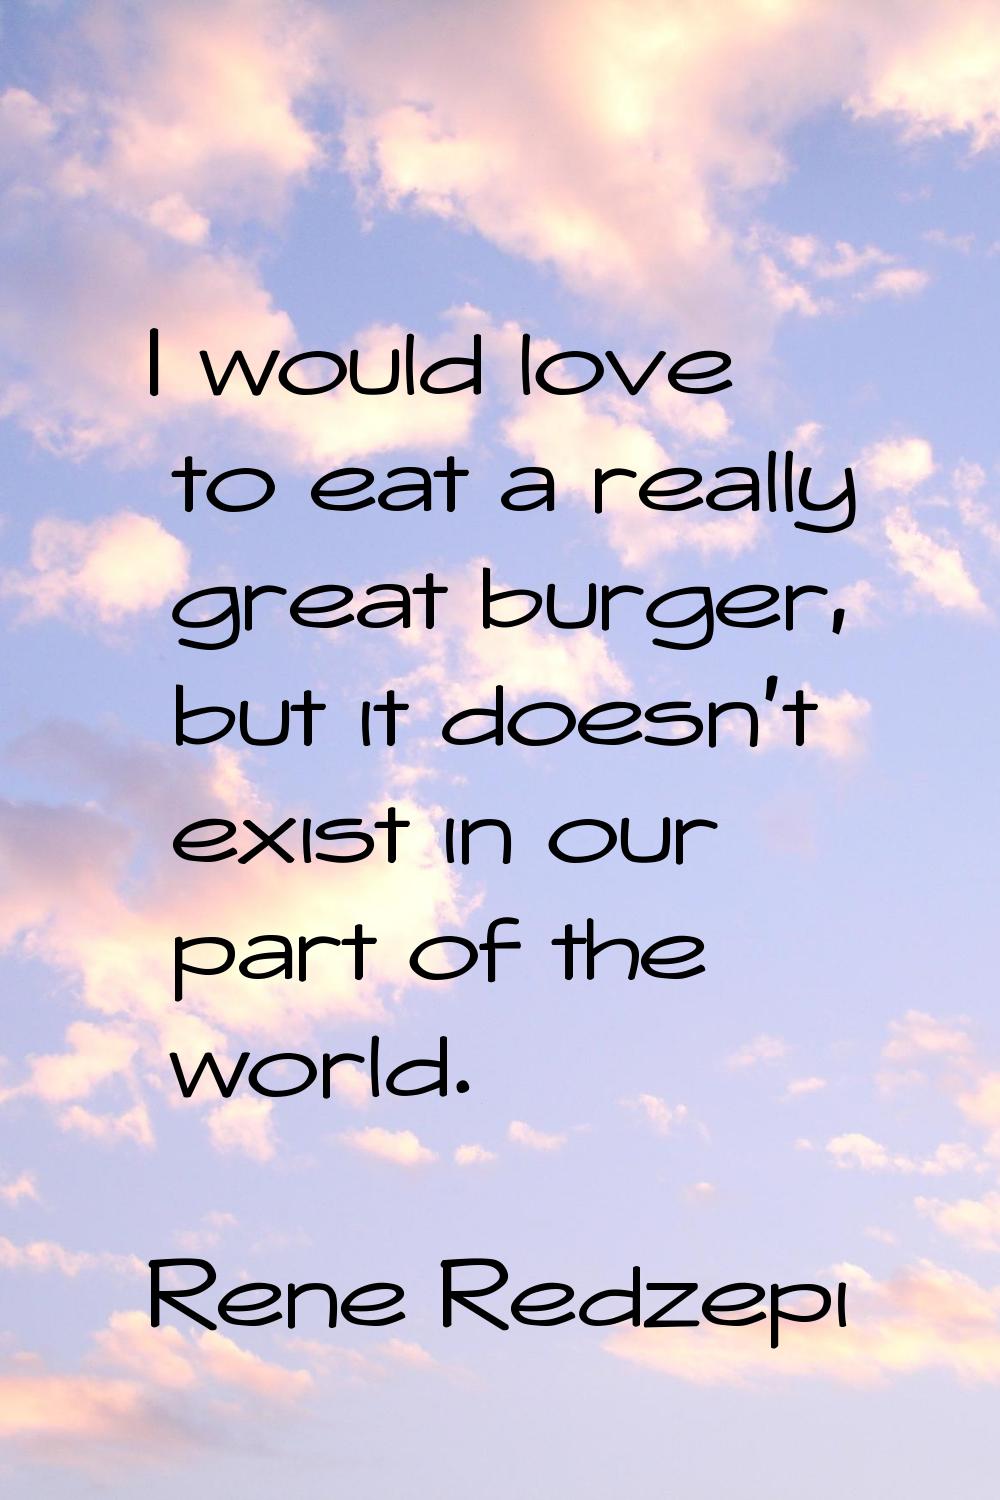 I would love to eat a really great burger, but it doesn't exist in our part of the world.